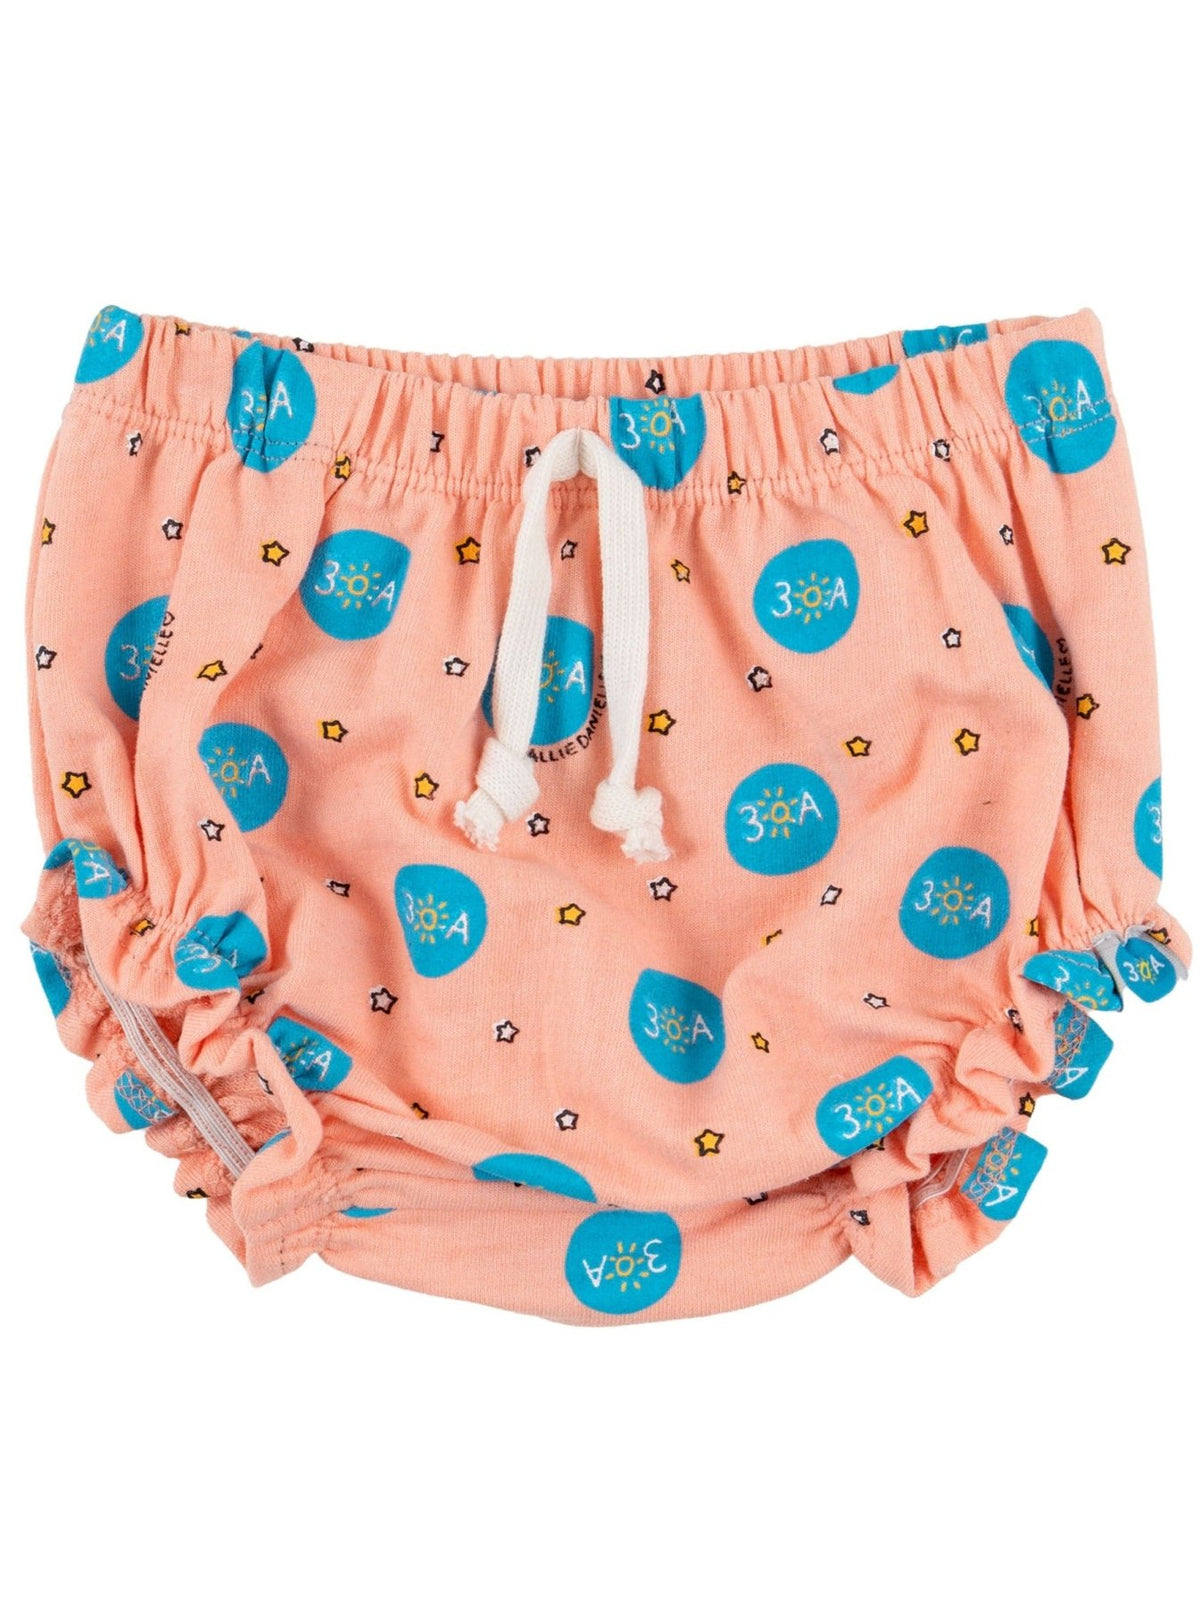 30A x Callie Danielle Toddler Bloomers - 30A Gear - youth toddler